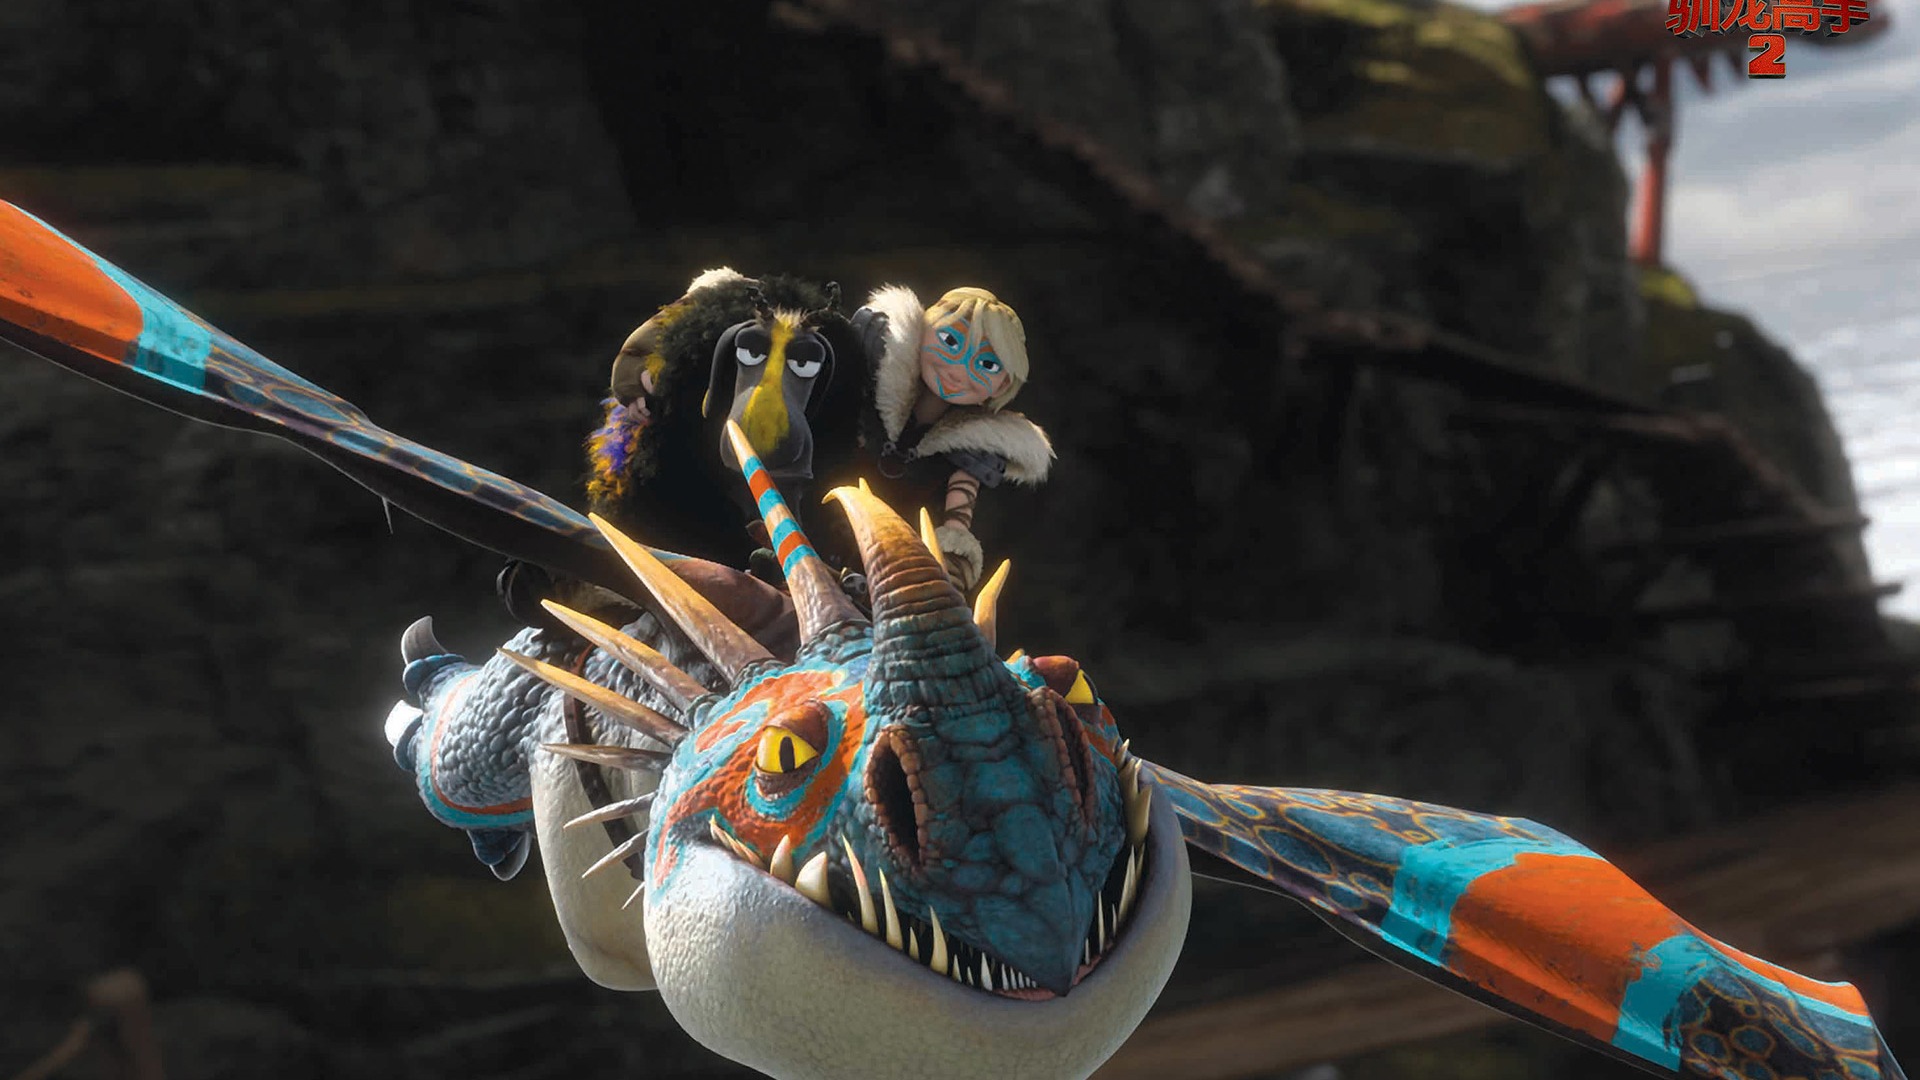 How to Train Your Dragon 2 驯龙高手2 高清壁纸11 - 1920x1080